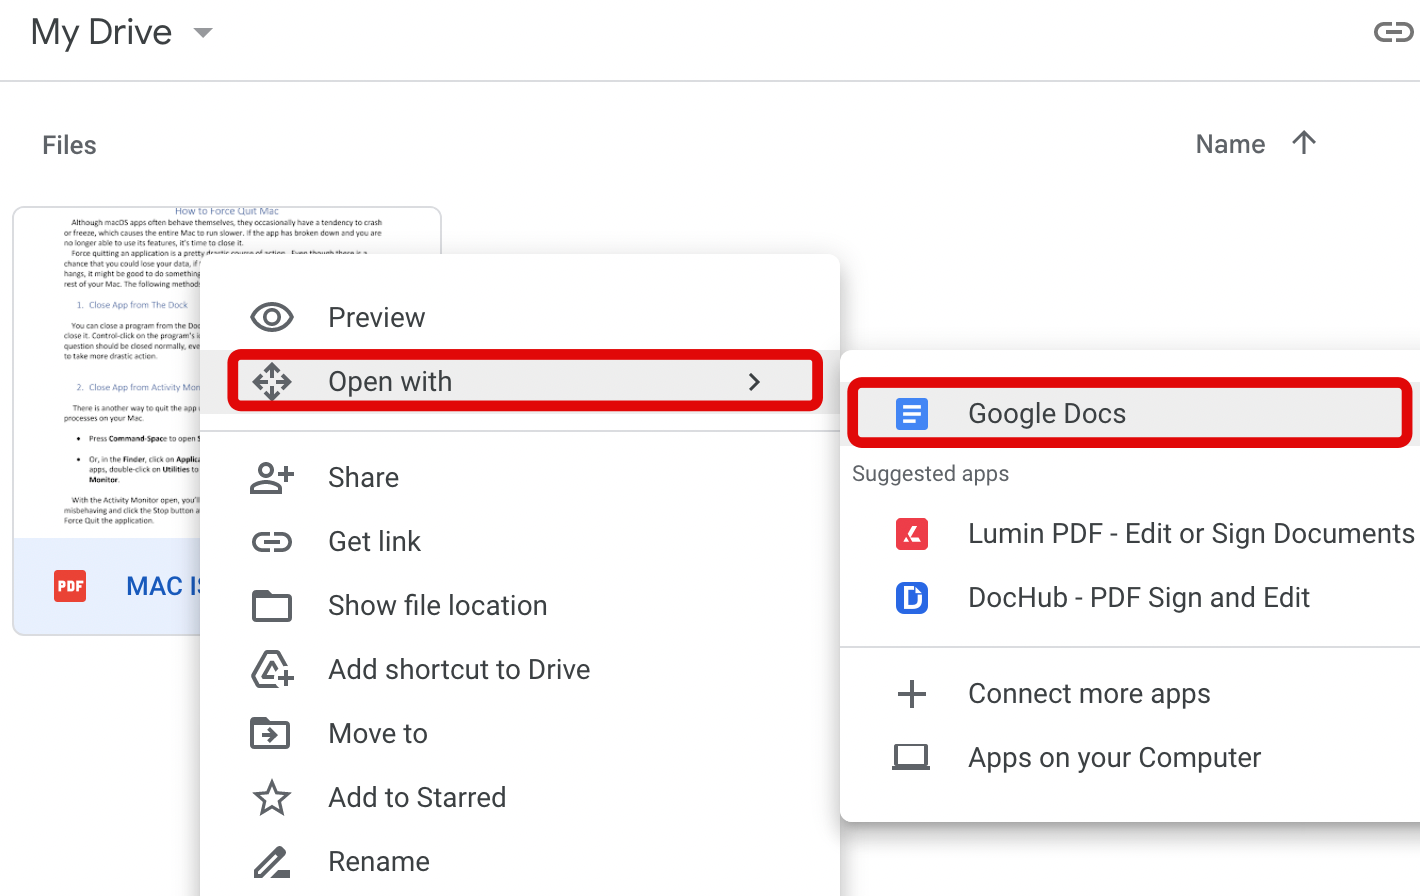 open with > google docs